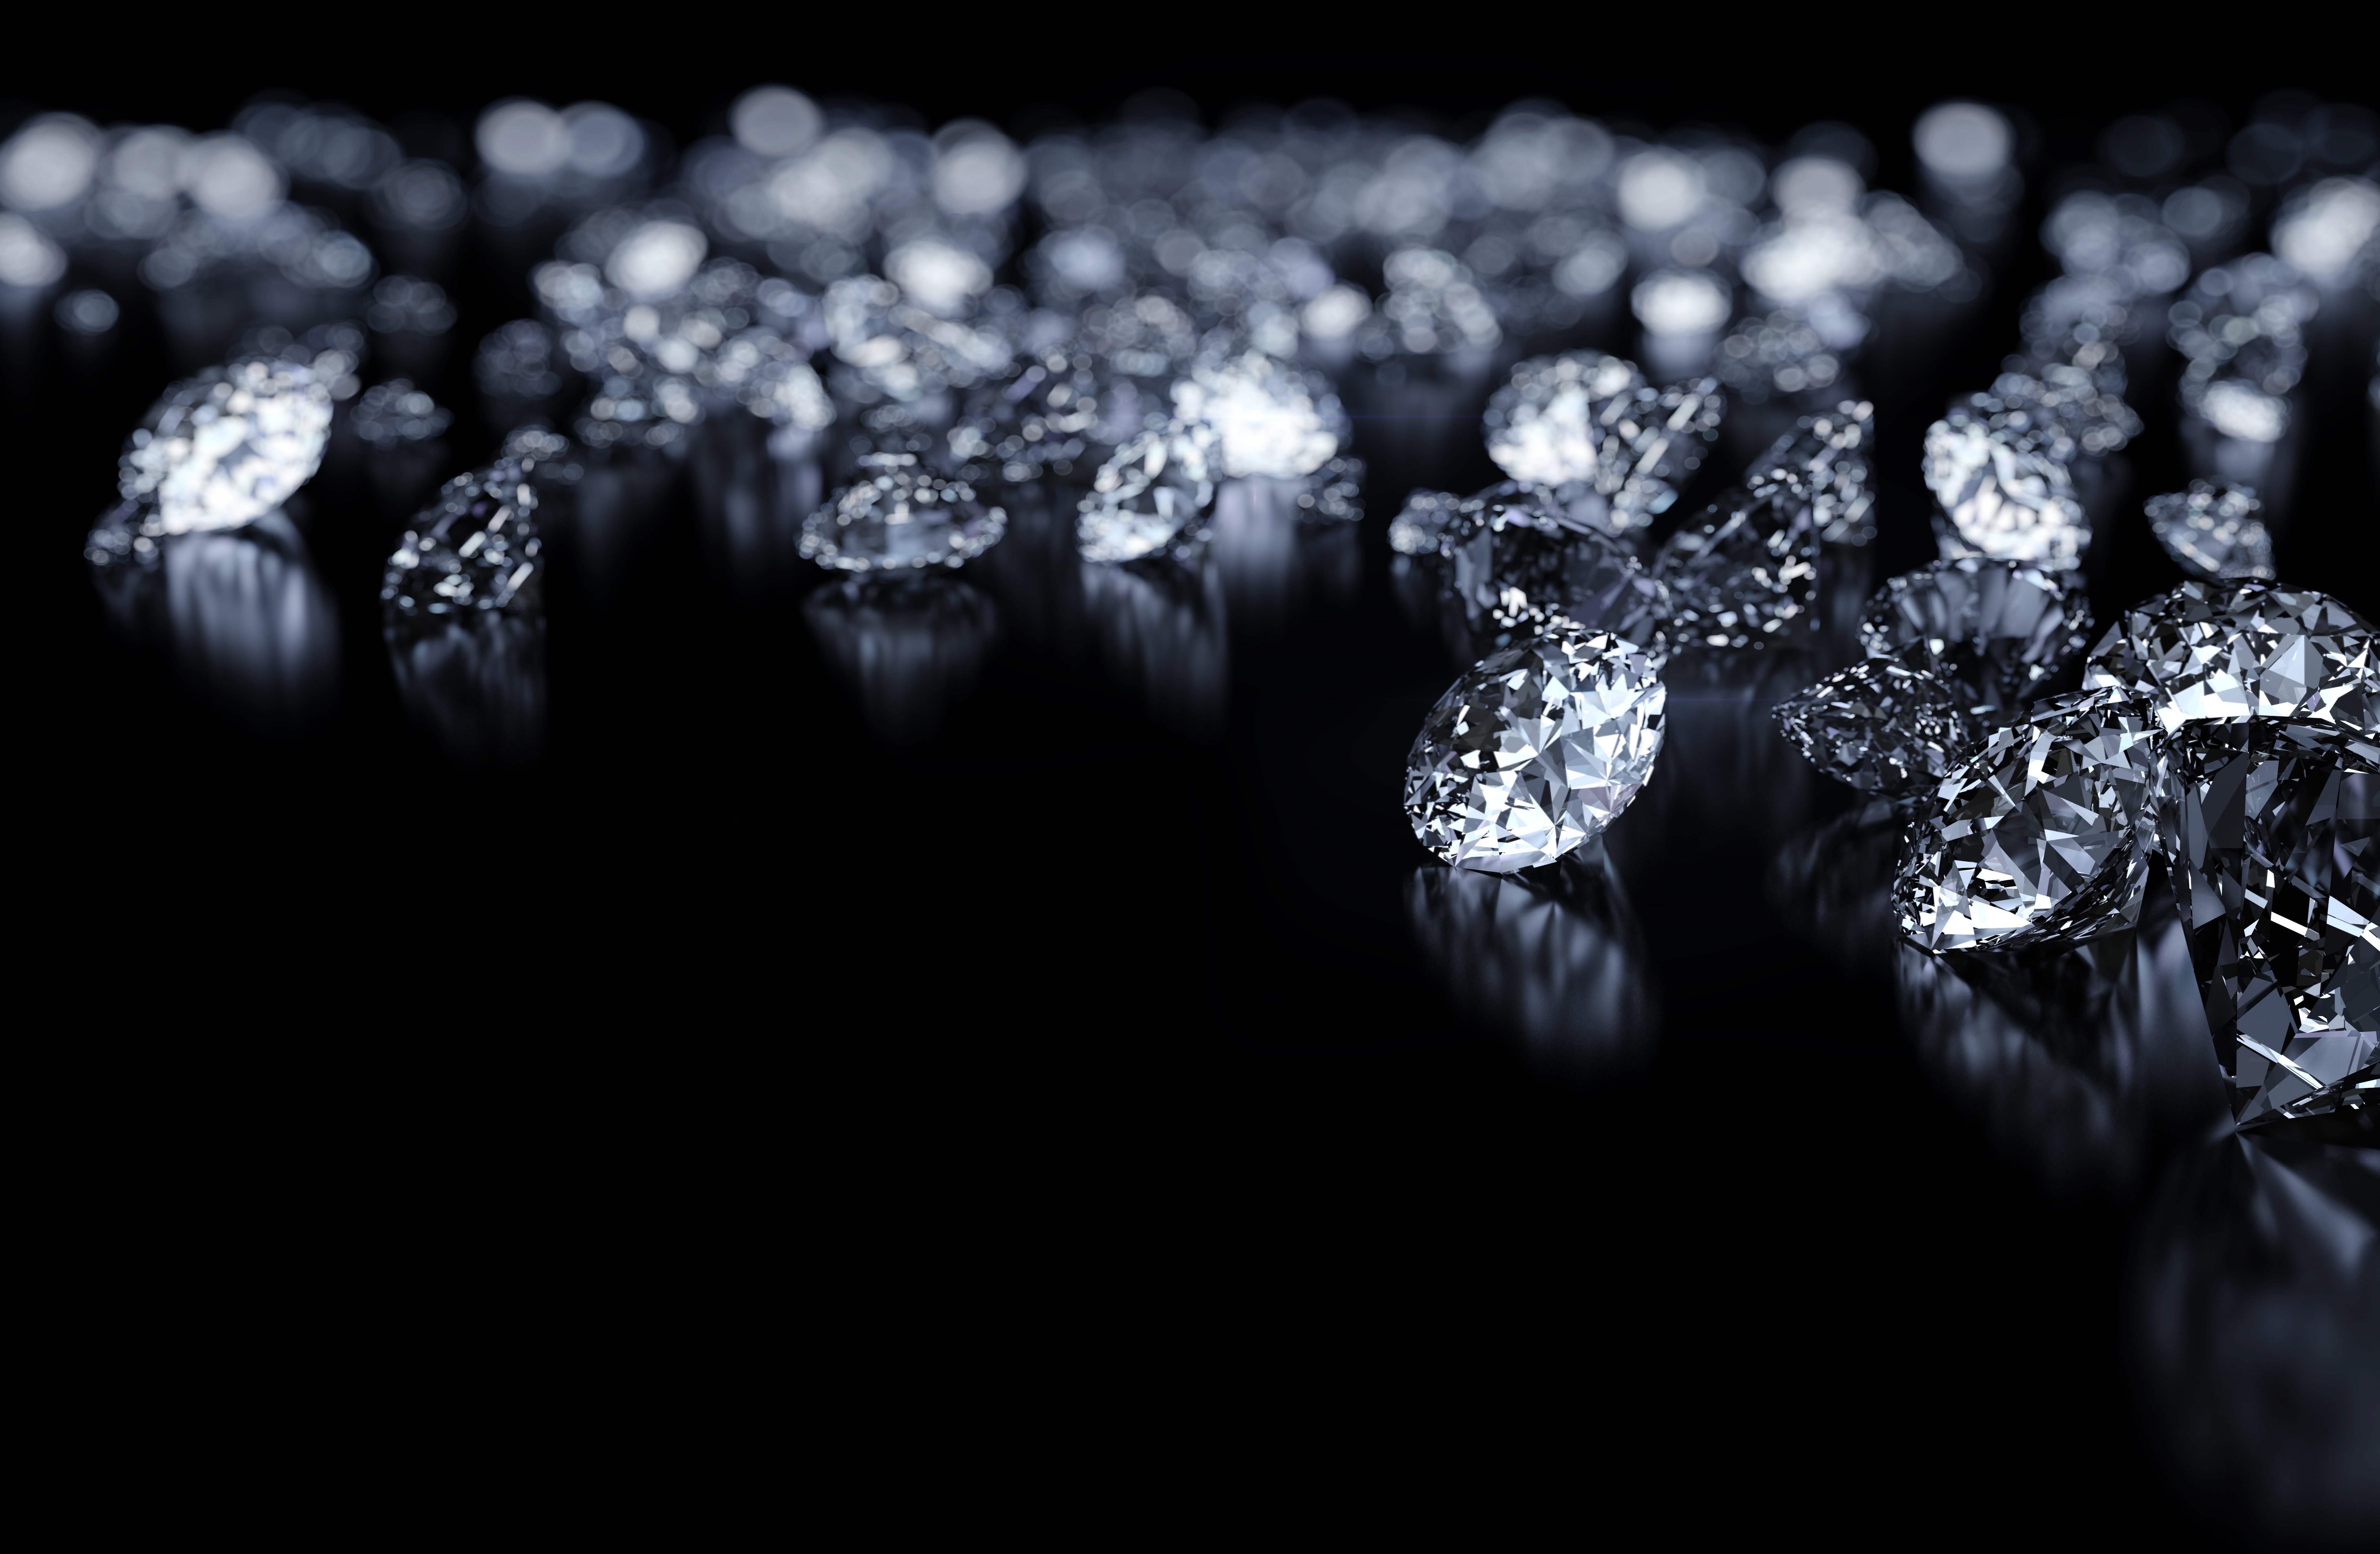 Jewelery Bokeh Bling Abstraction Abstract Sparkle Wallpaper Background